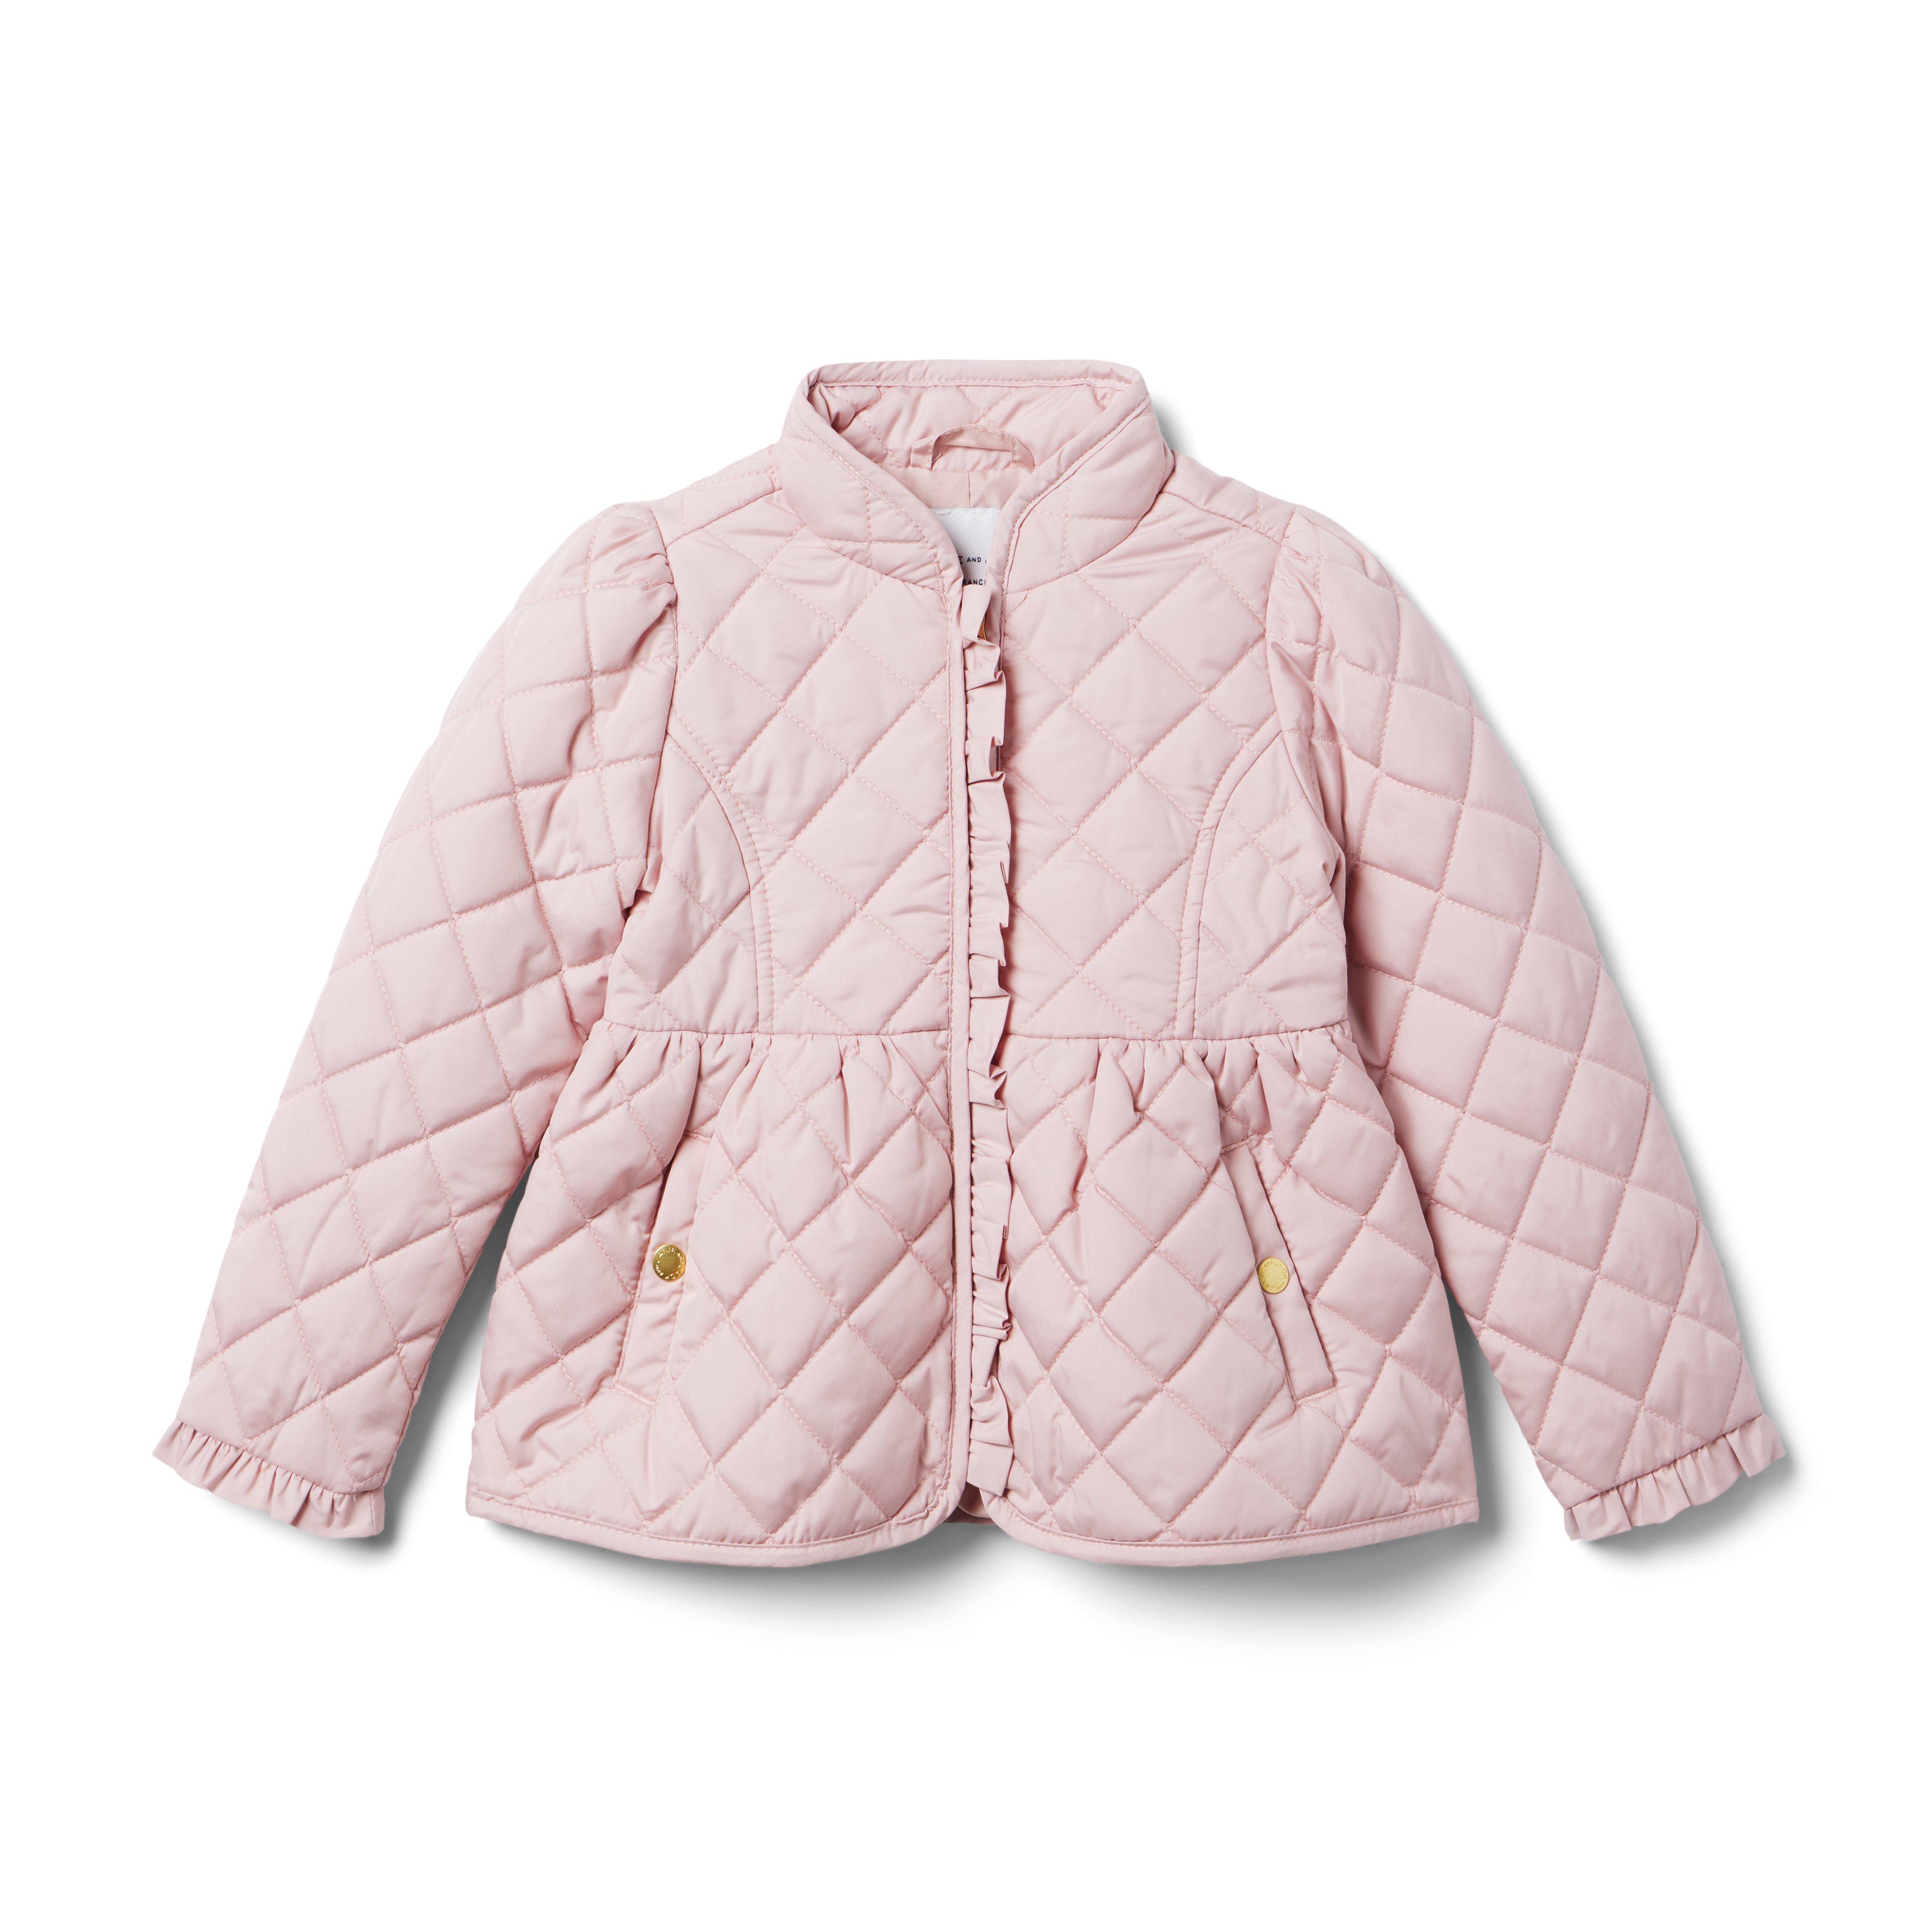 The Quilted Barn Coat